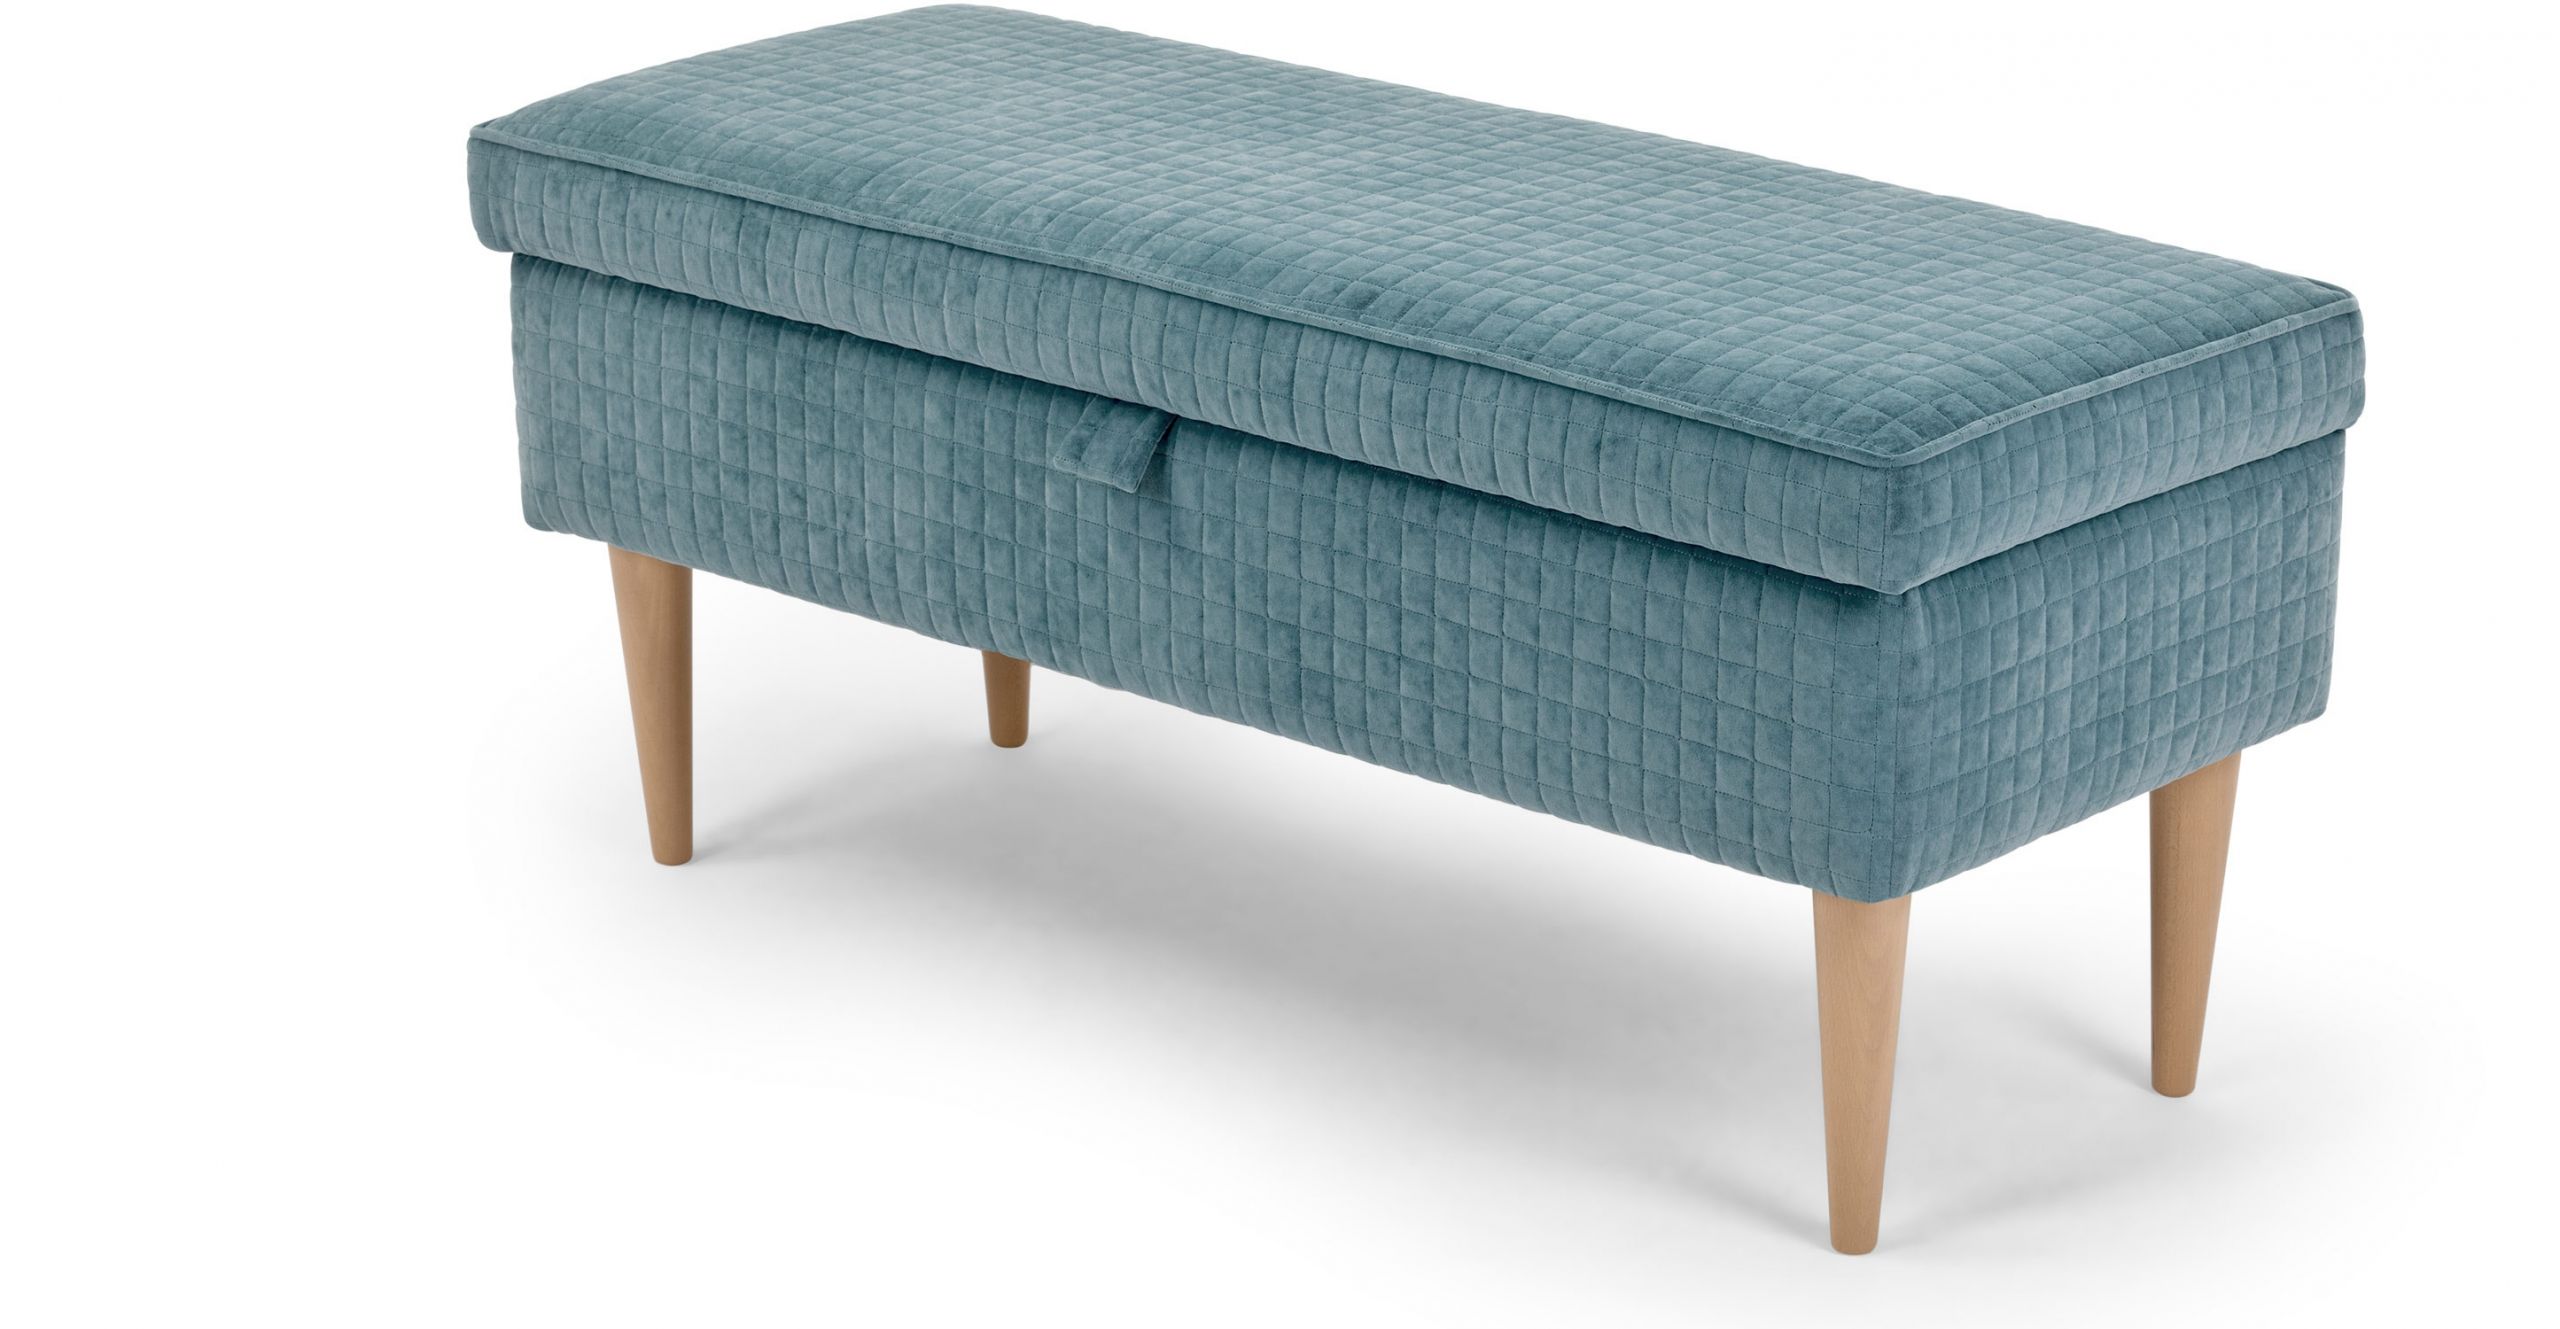 Turquoise Bench With Storage
 Upholstered Bench with Storage – HomesFeed